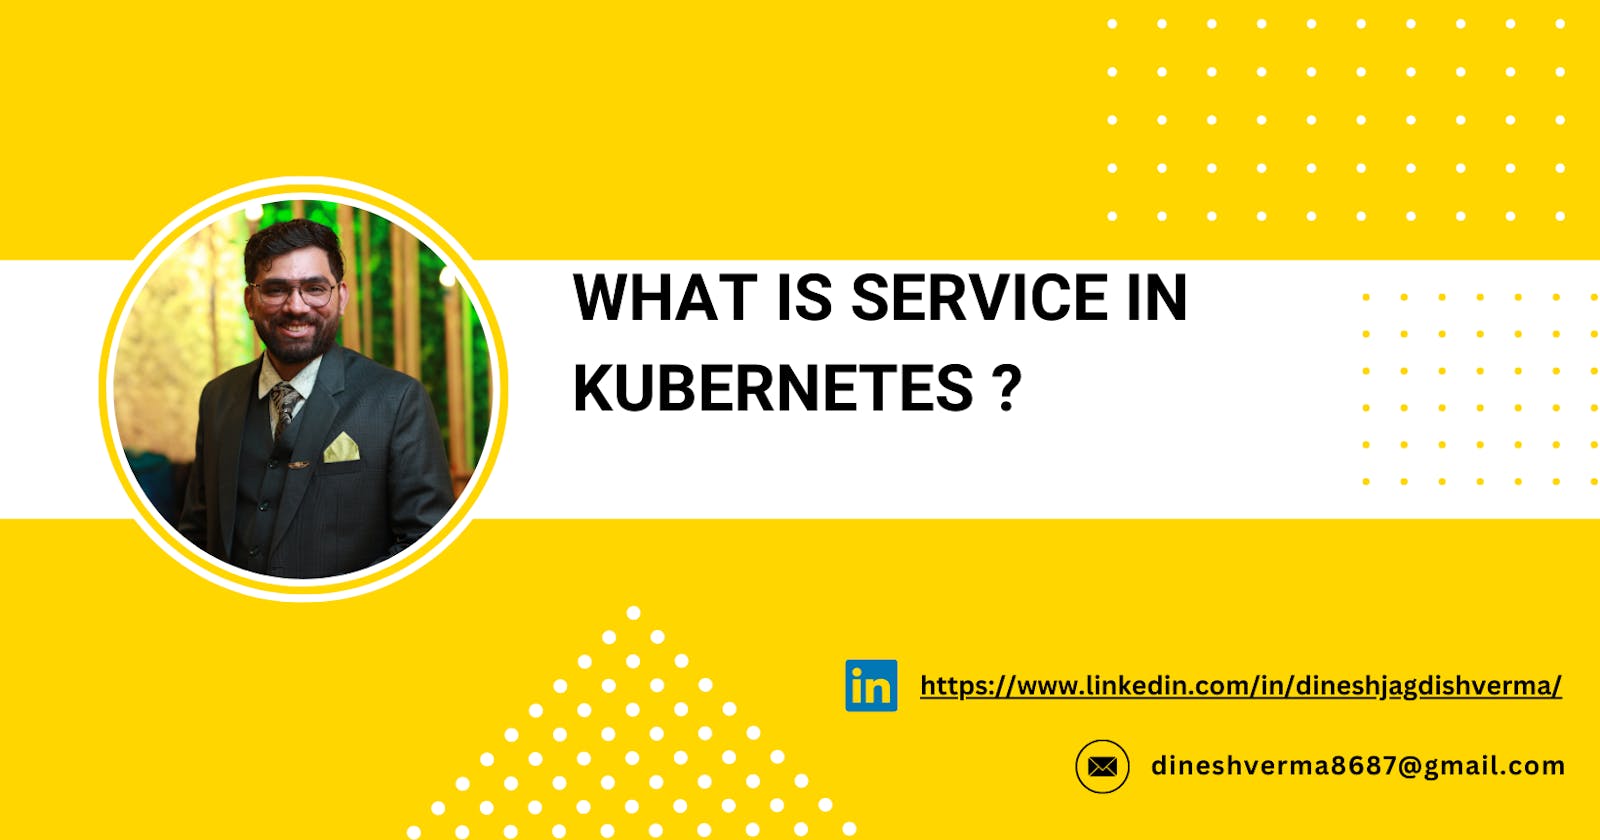 what is service in Kubernetes?